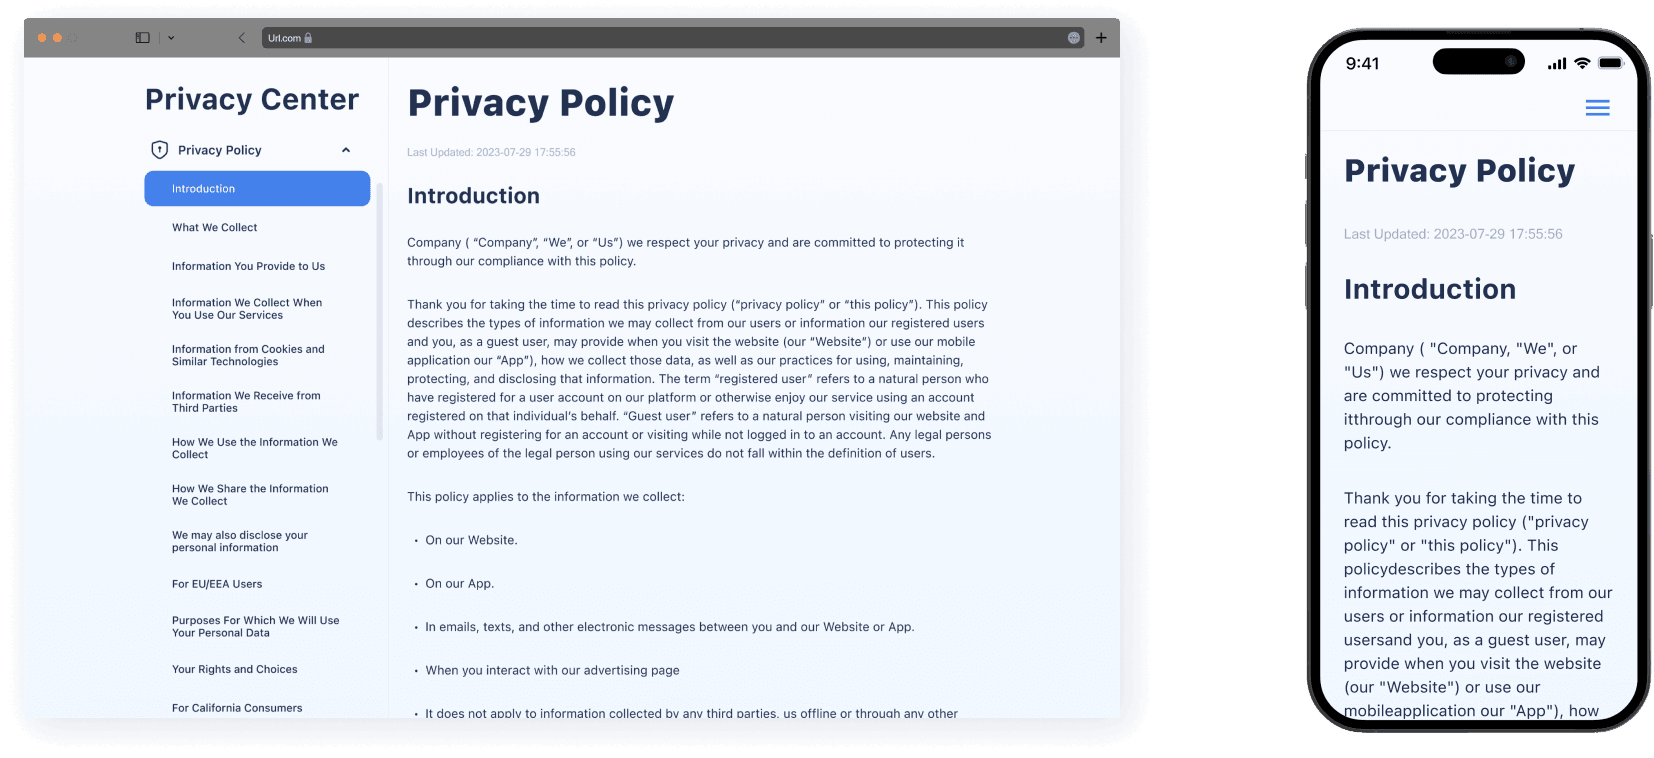 Kaamel-Privacy Center-Privacy Policy, Terms of Use, Cookie Policy, Do not Sell or Share